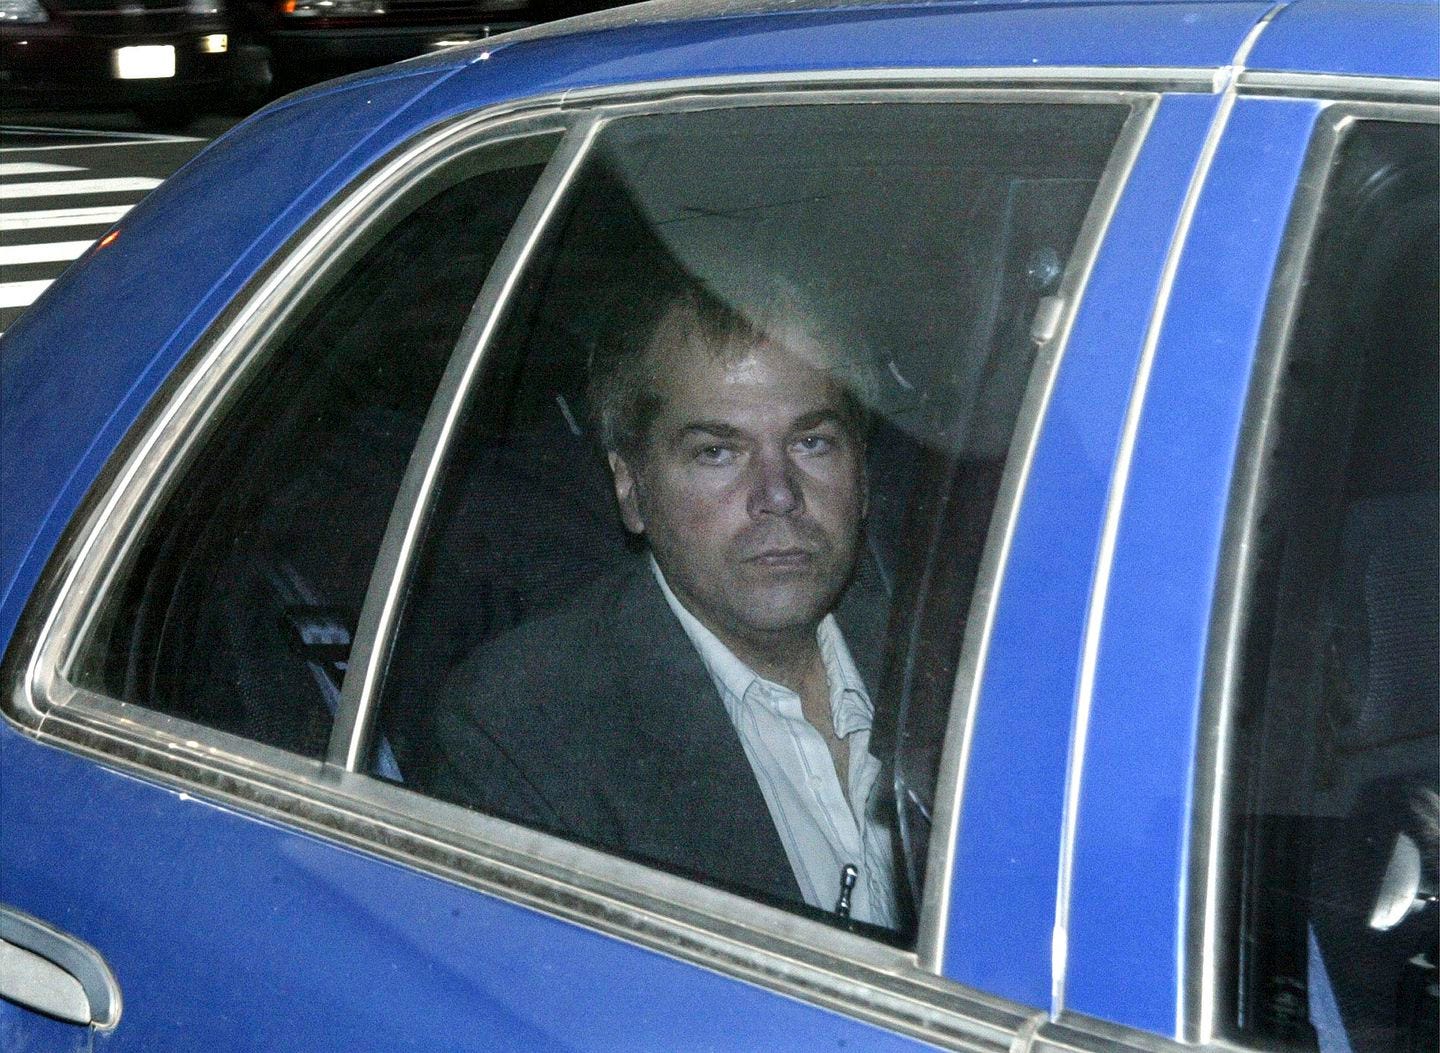 John Hinckley Jr. arrives at U.S. District Court in Washington in 2003. Lawyers are scheduled to meet in federal court on Monday to discuss whether Hinckley Jr., the man who tried to assassinate President Ronald Reagan, should be freed from court-imposed restrictions including overseeing his medical care and keeping up with his computer passwords.